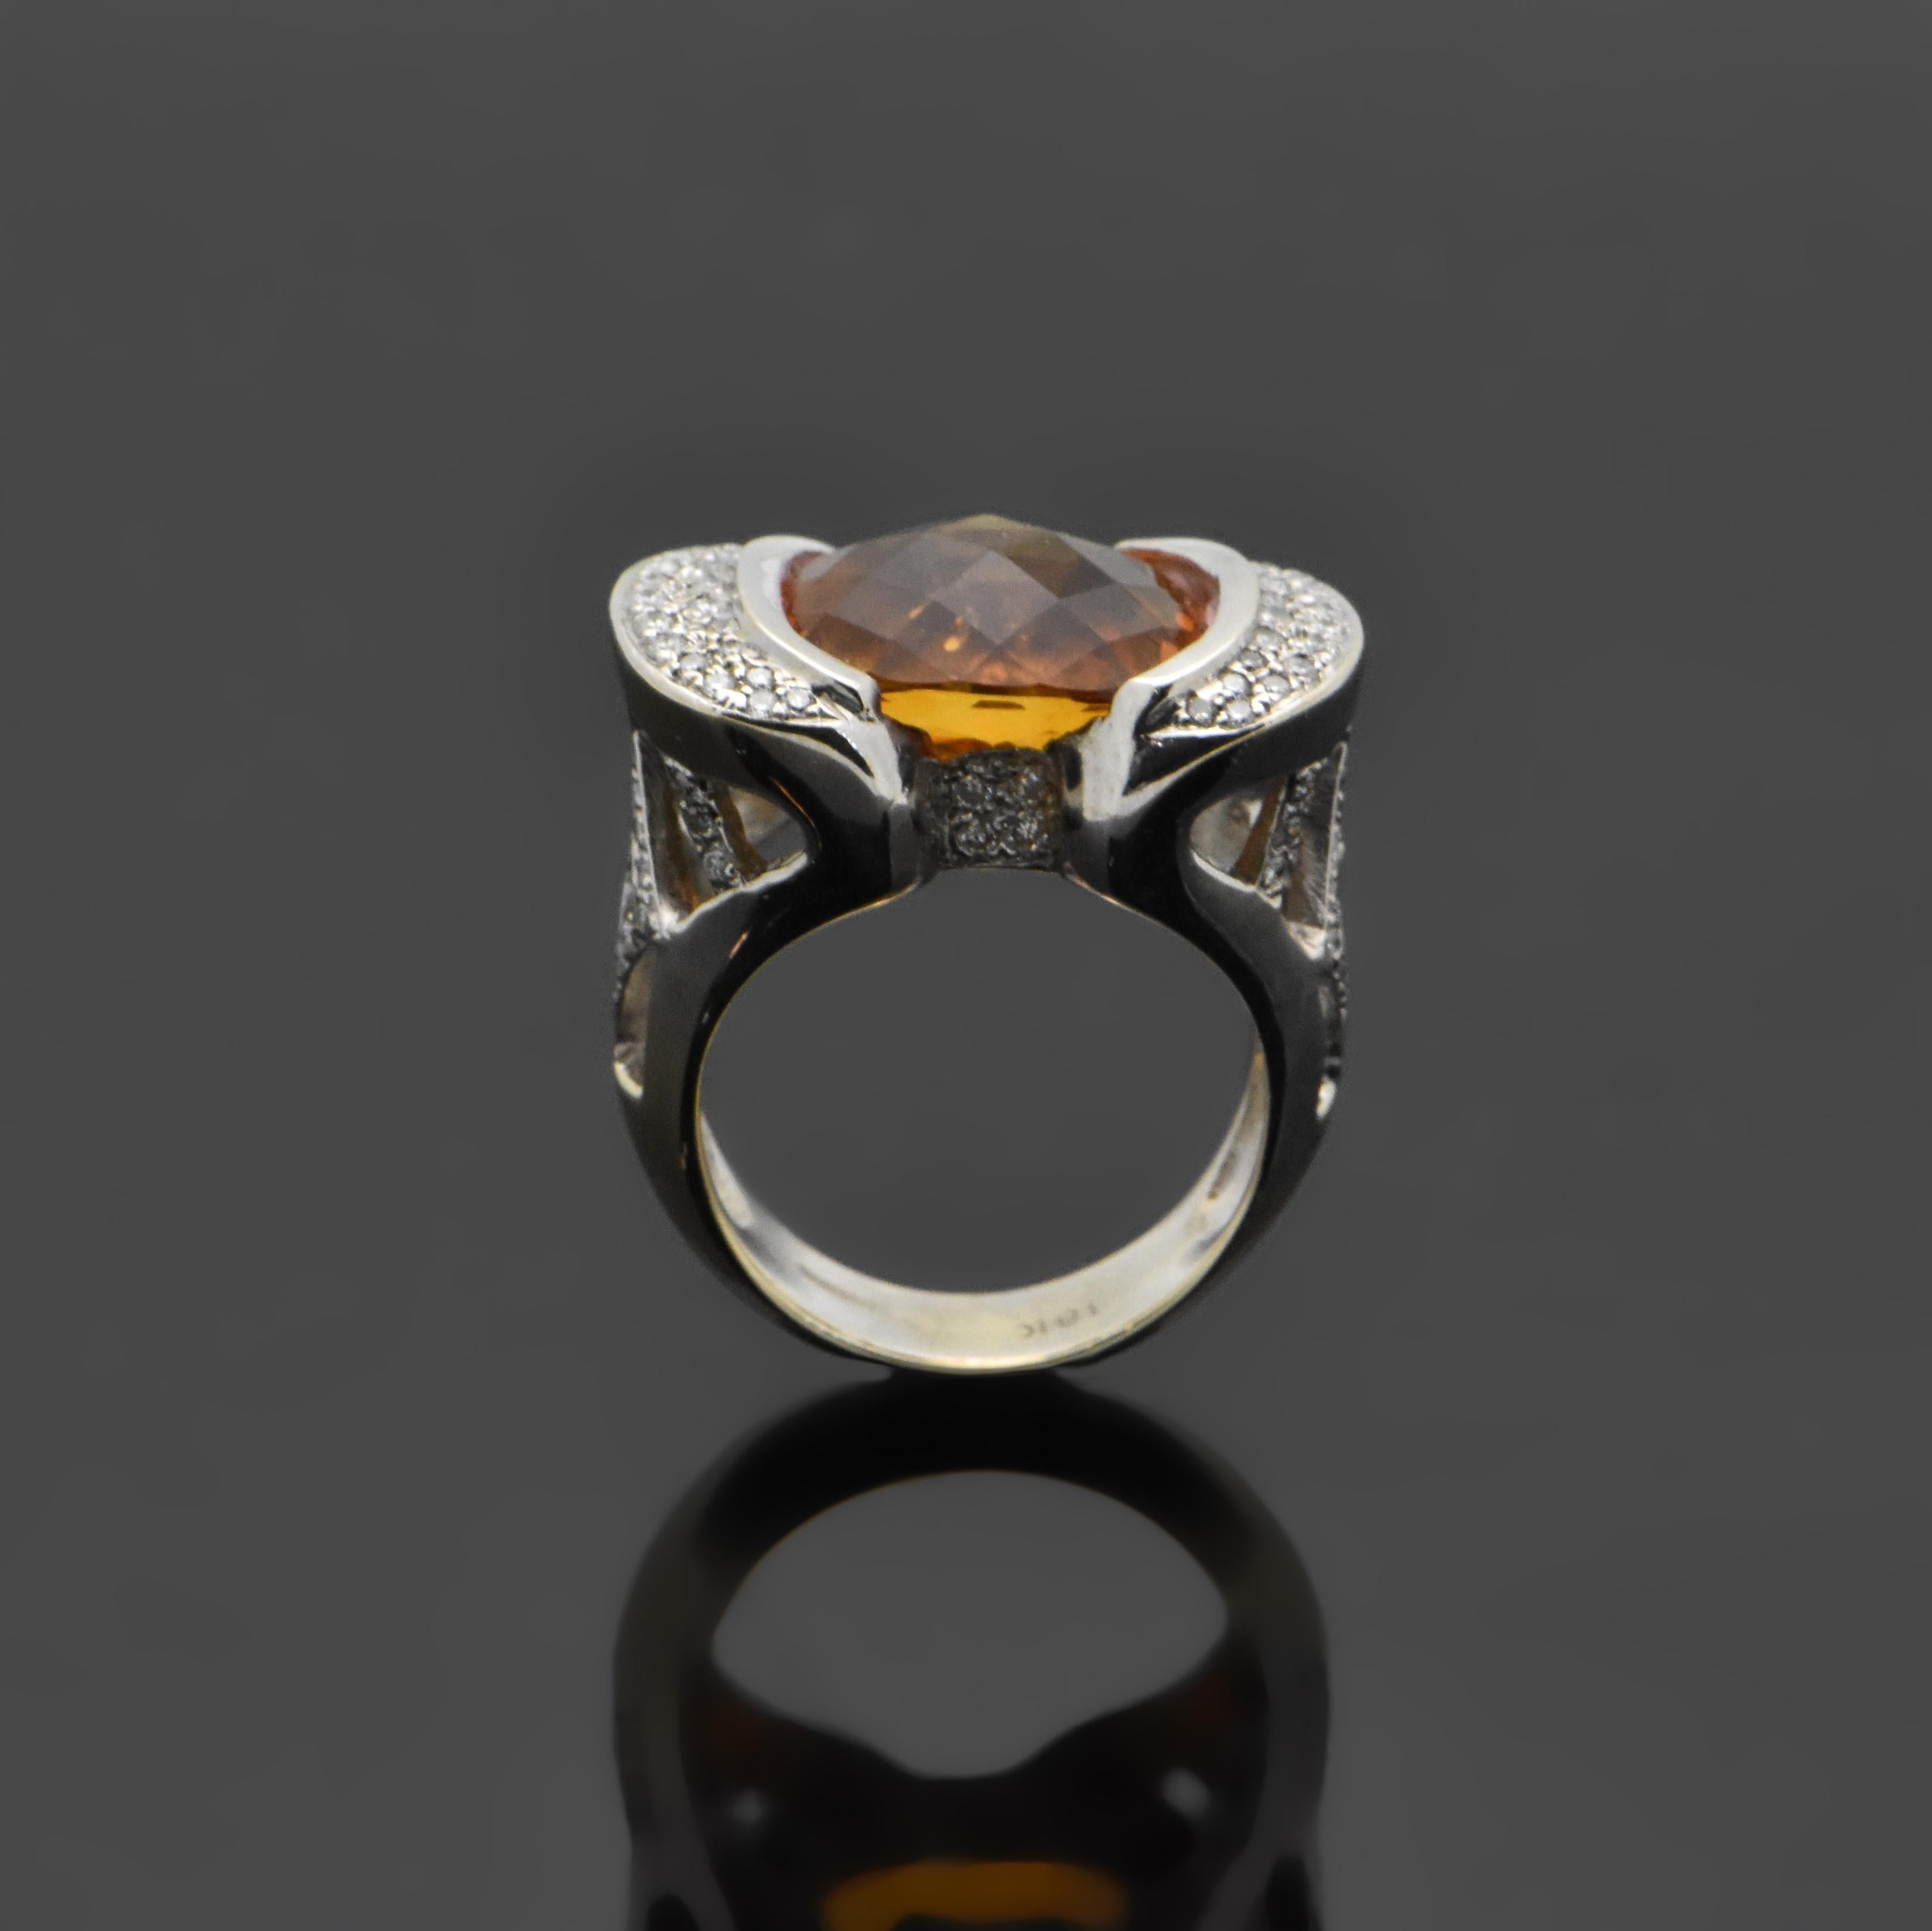 A vintage 18kt white gold ring featuring a large oval-cut citrine with an estimated weight of 3.53ct. highlighted with diamonds at an estimated 0.60 cttw. Estimated weight of gold is 8 gr. 

We will size it for you.

